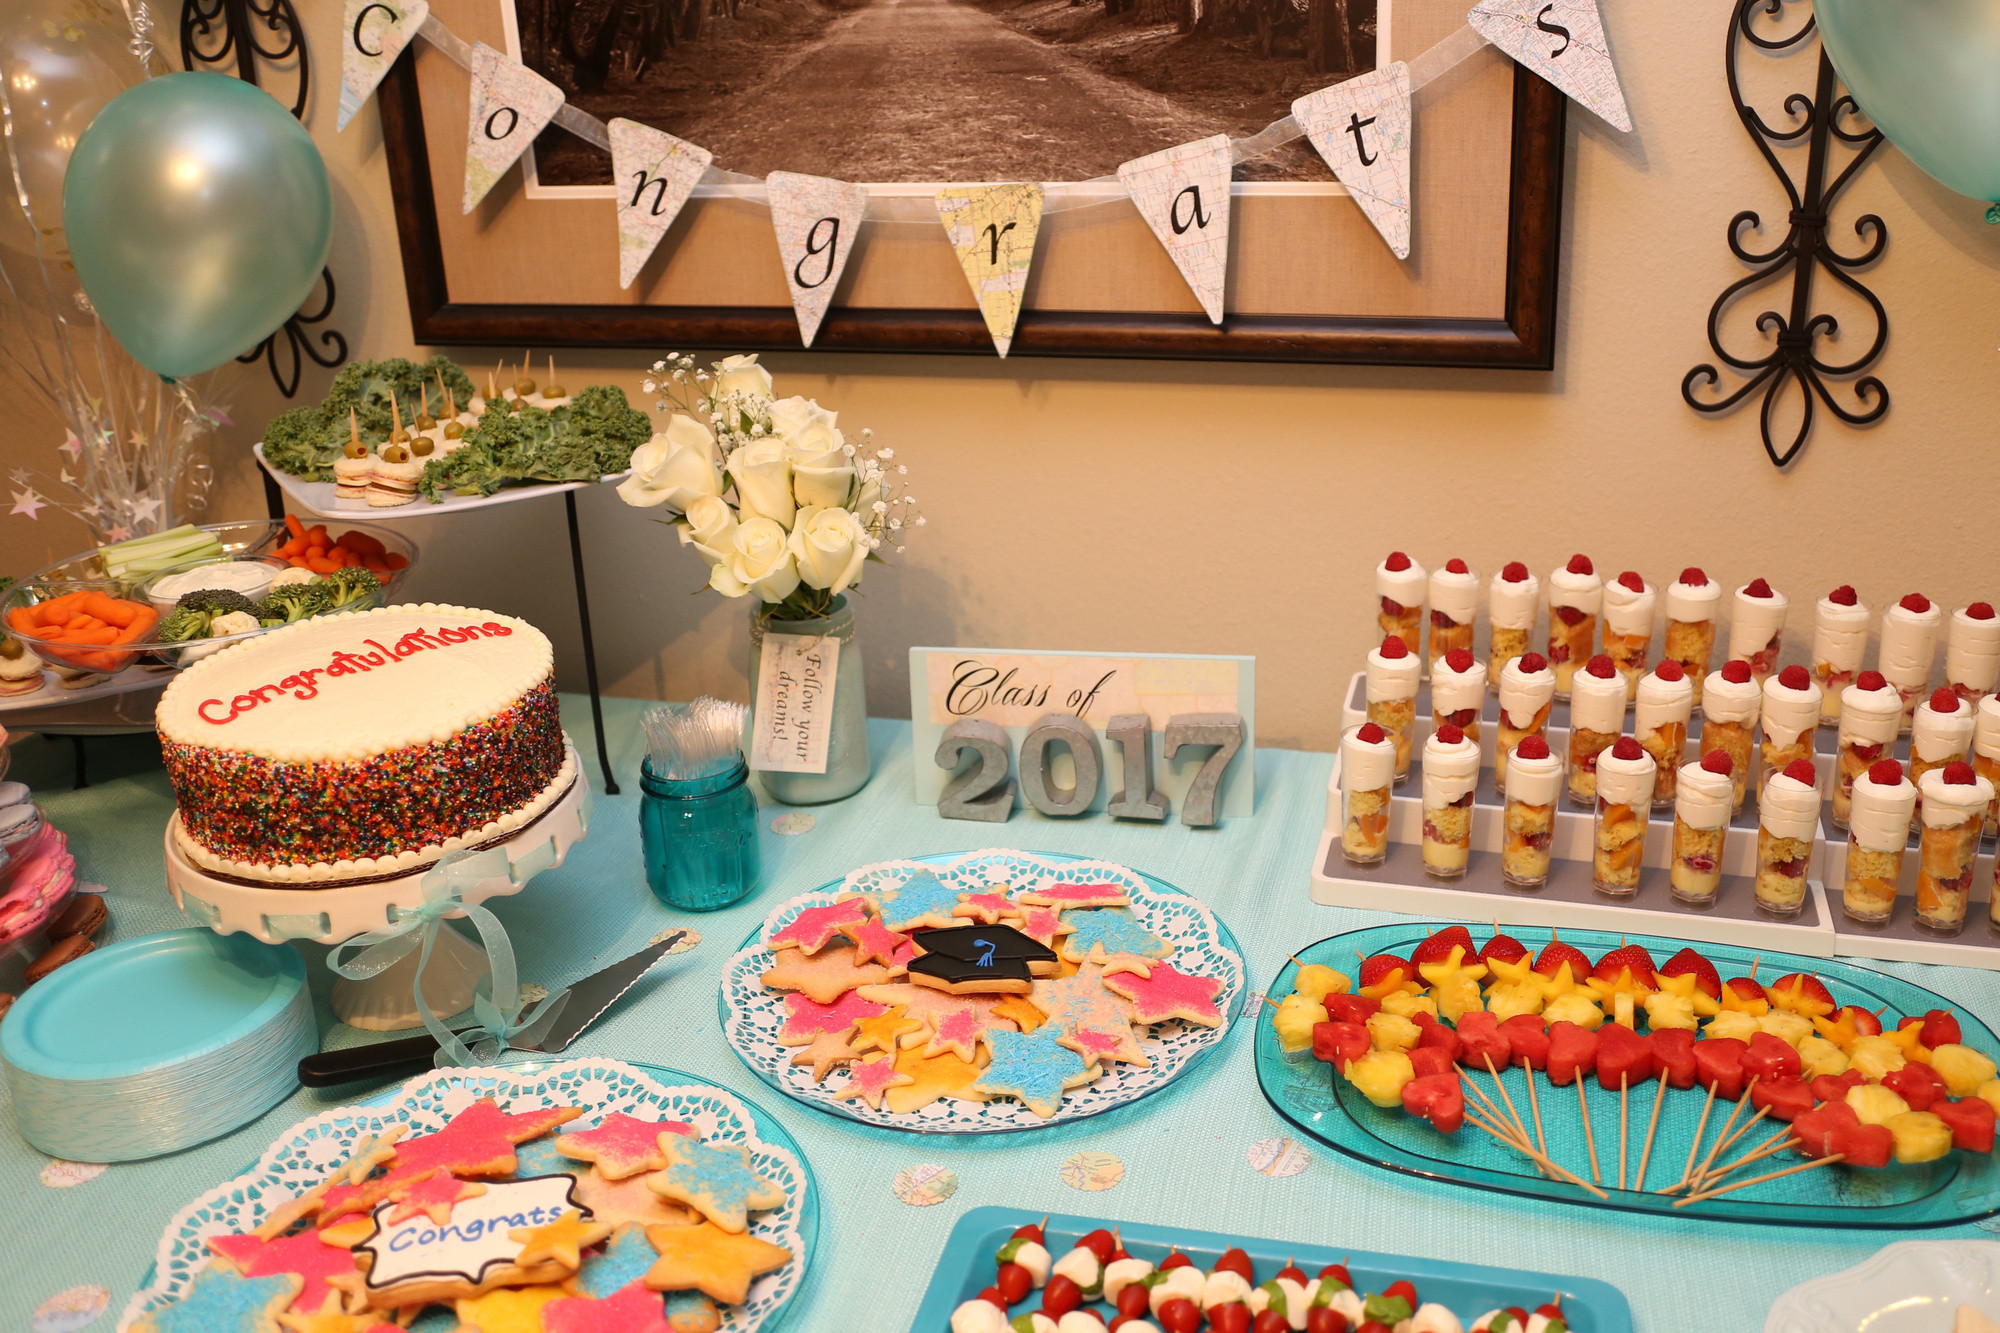 Great Graduation Party Food Ideas
 9 Incredible Graduation Party Food Ideas